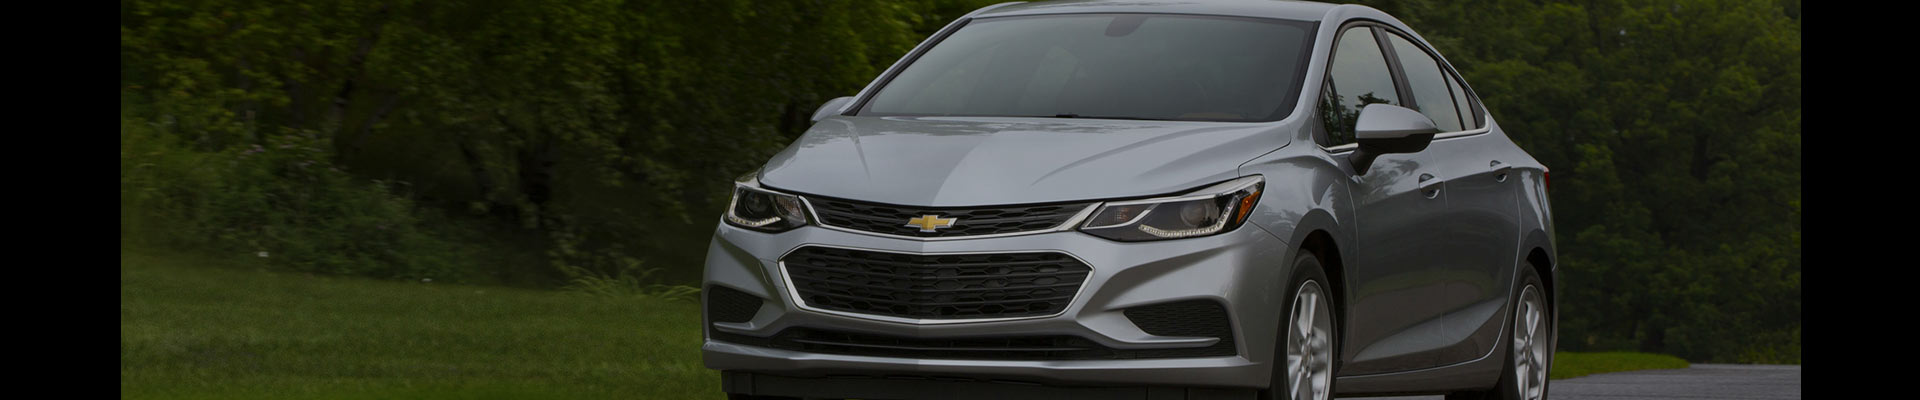 Parts for 2016 Chevrolet Cruze